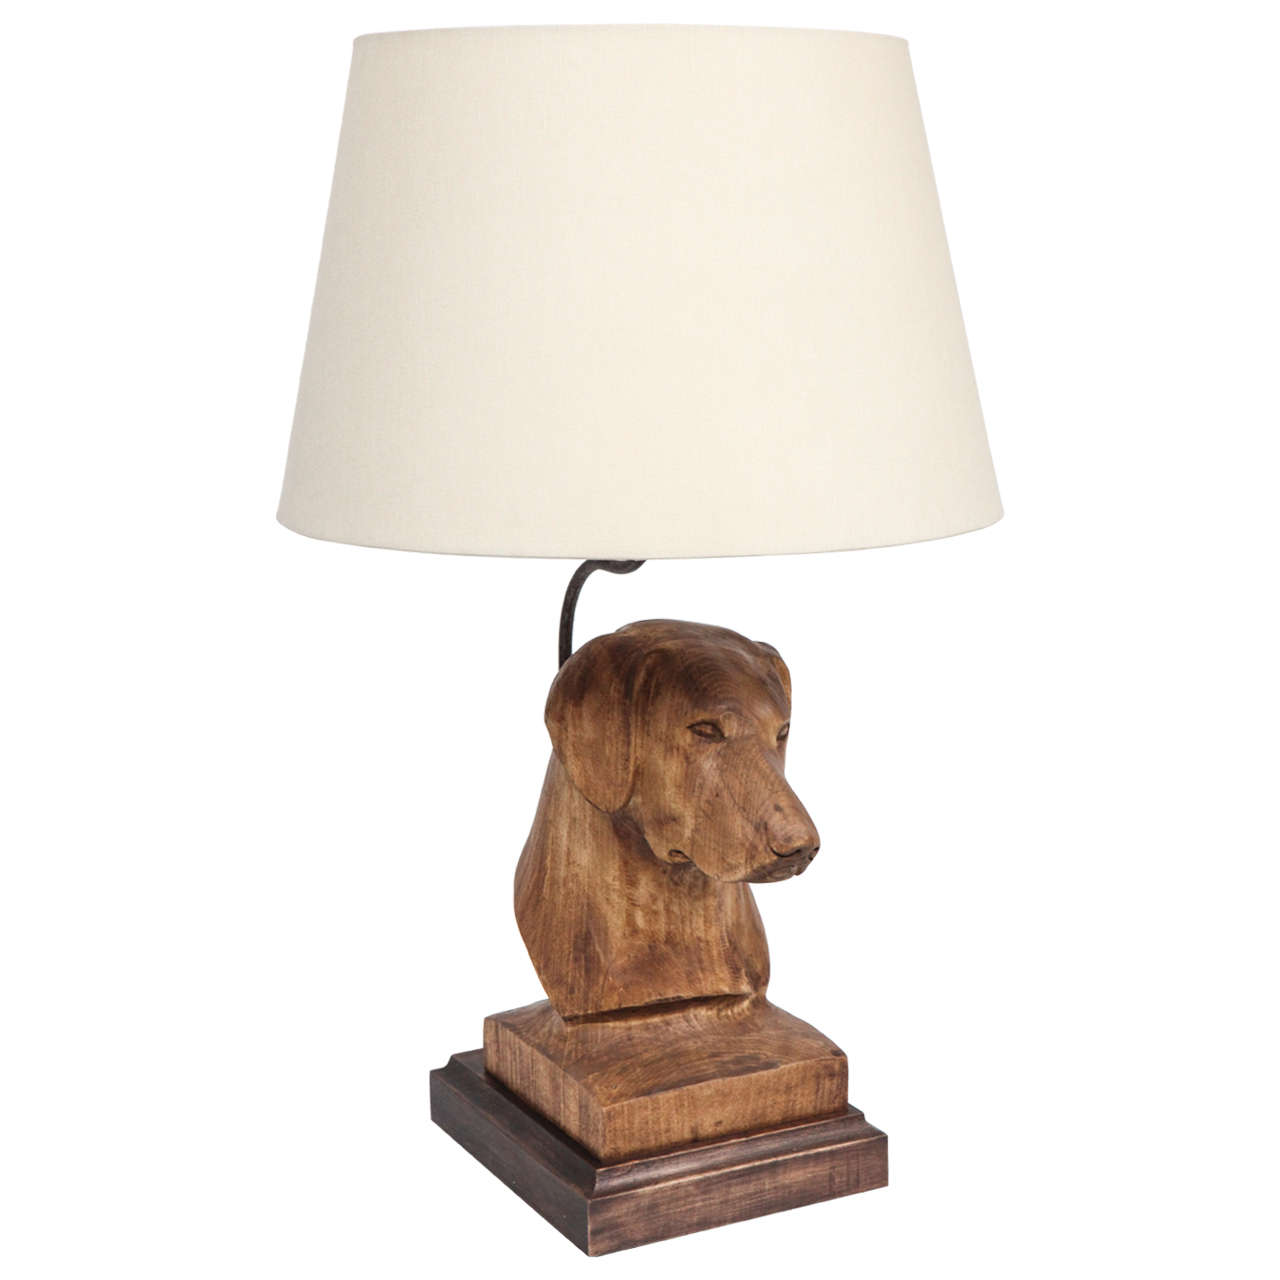 Limited Edition Jefferson West Private Label Dog Lamp For Sale